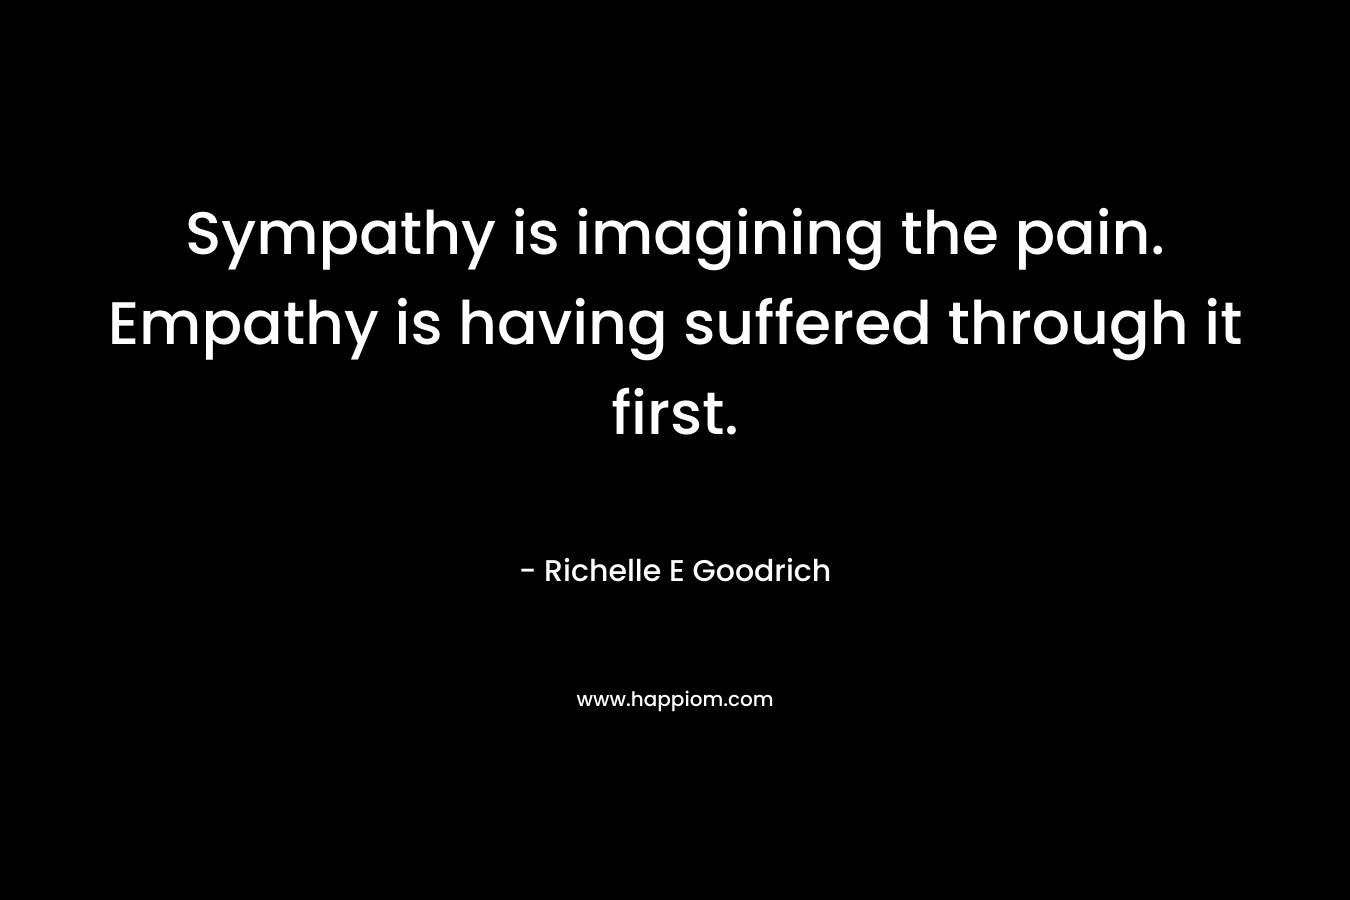 Sympathy is imagining the pain. Empathy is having suffered through it first.